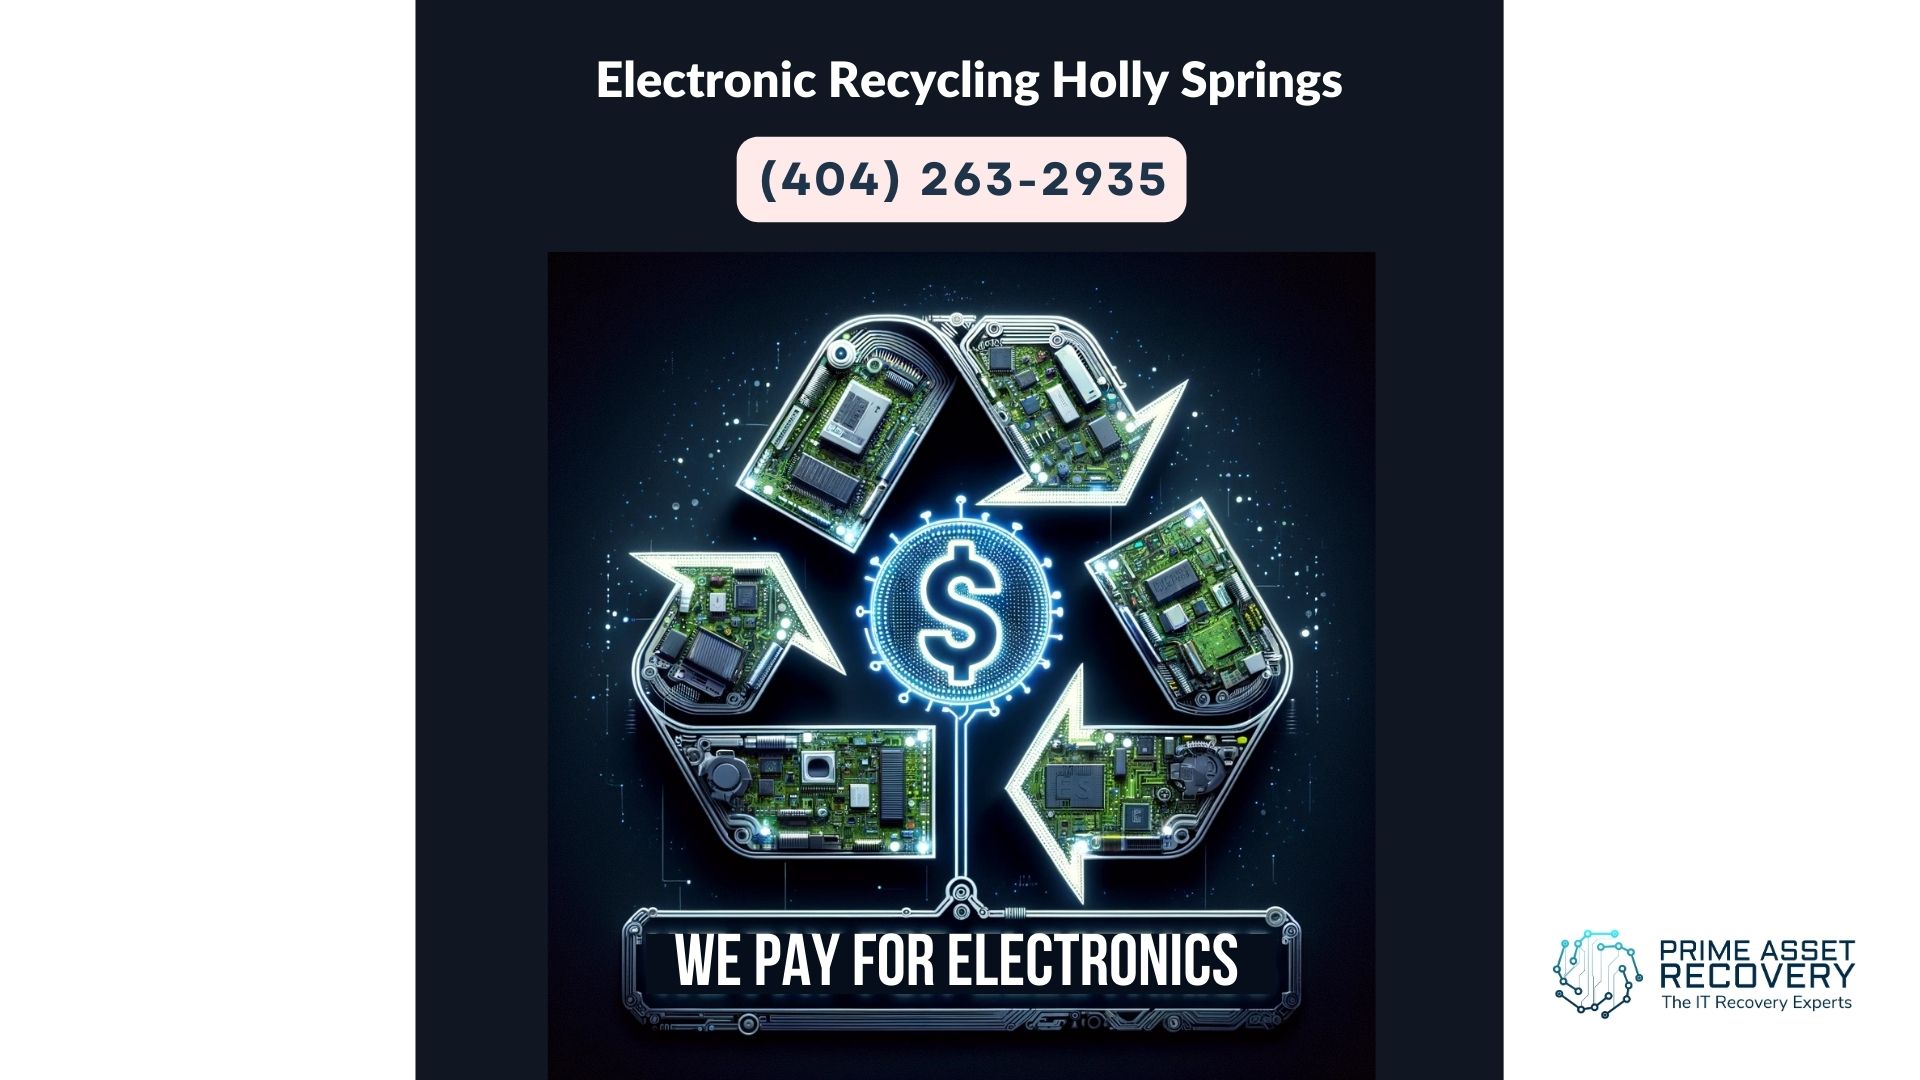 Electronics Recycling Holly Springs - Prime Asset Recovery Your Partner in Responsible Electronics Recycling